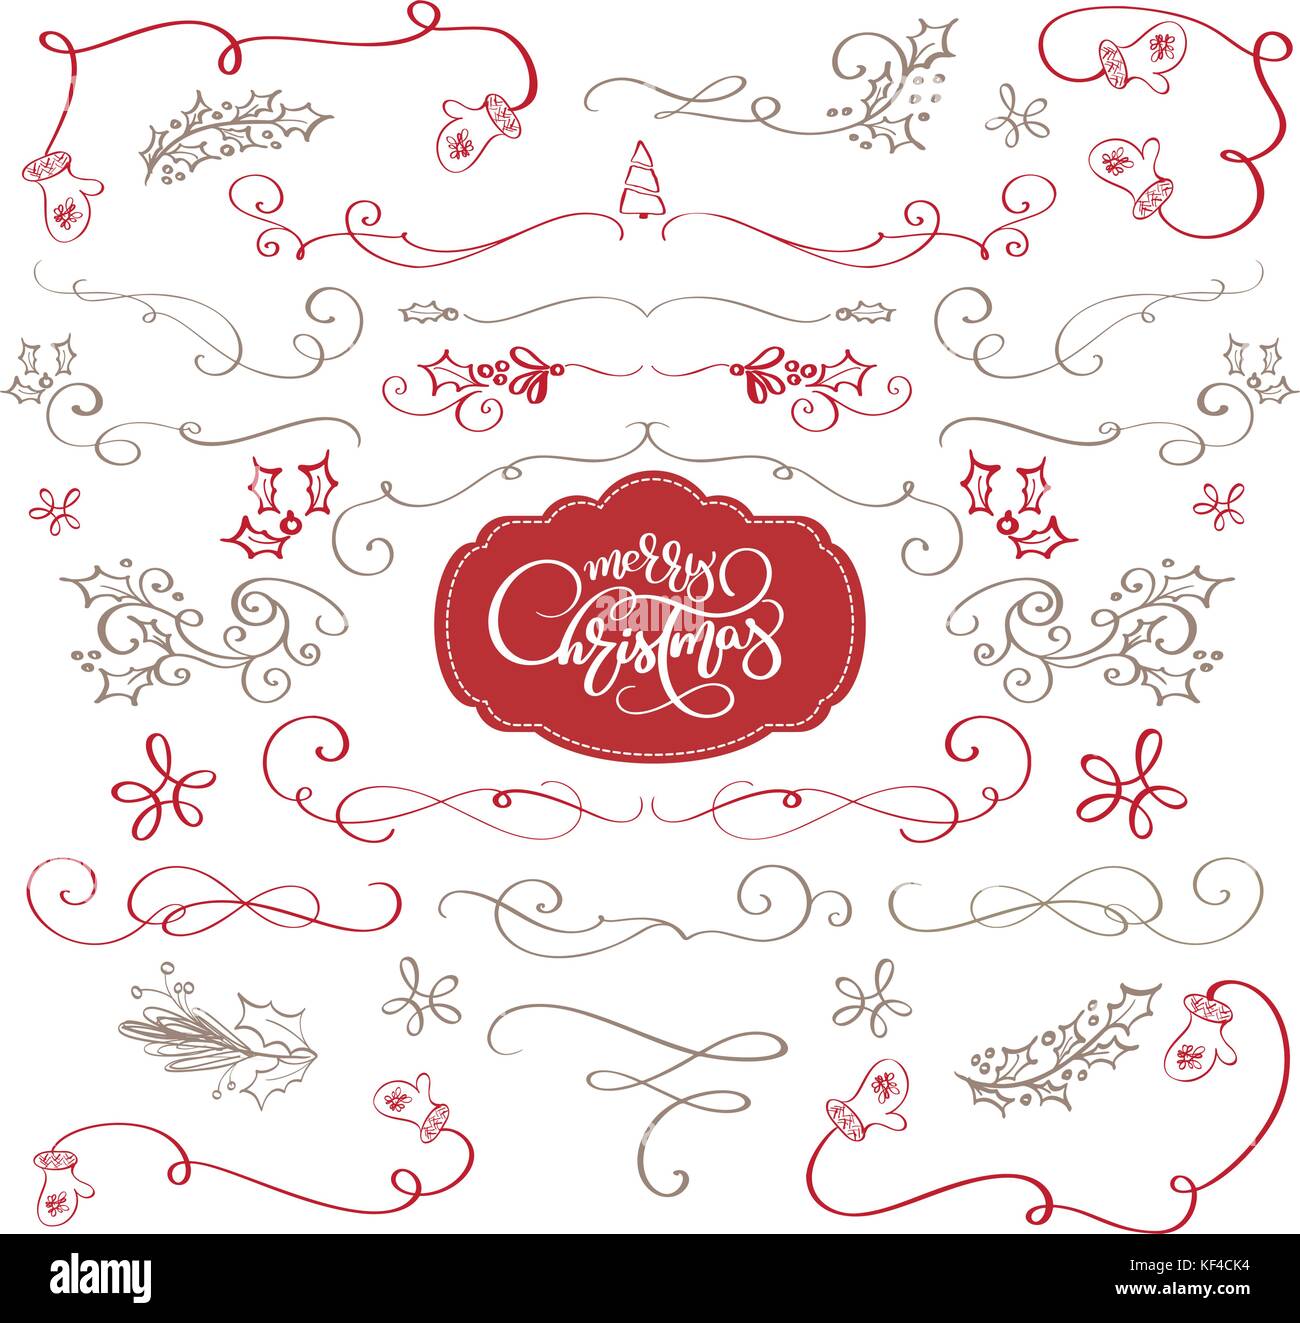 Winter set of decorative calligraphic elements Merry Christmas, dividers and new year ornaments for page decor. Vector lettering Stock Vector